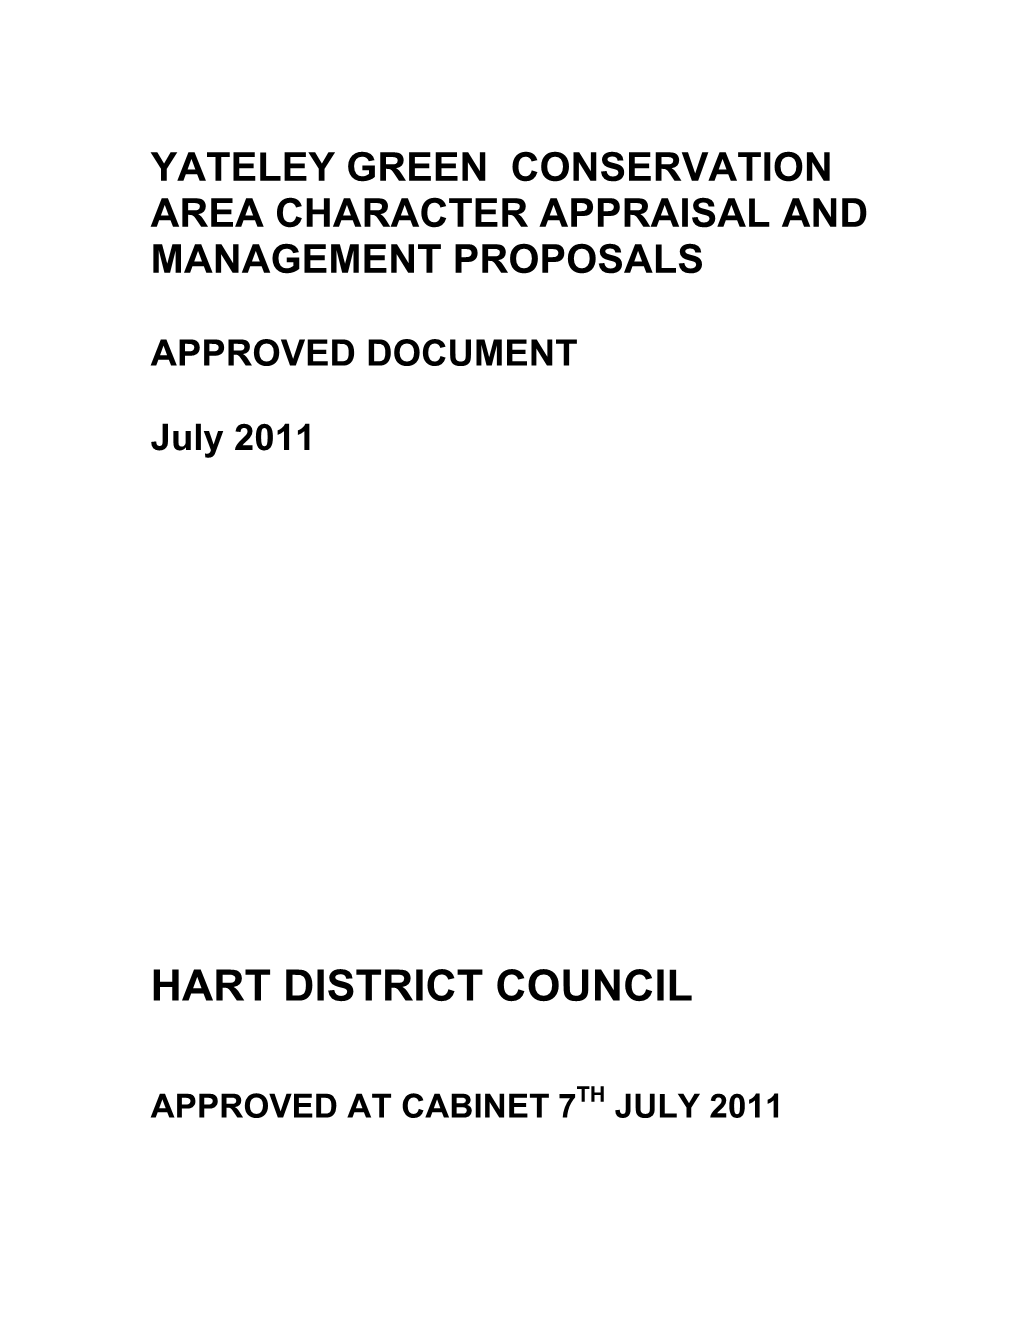 Yateley Green Conservation Area Character Appraisal and Management Proposals